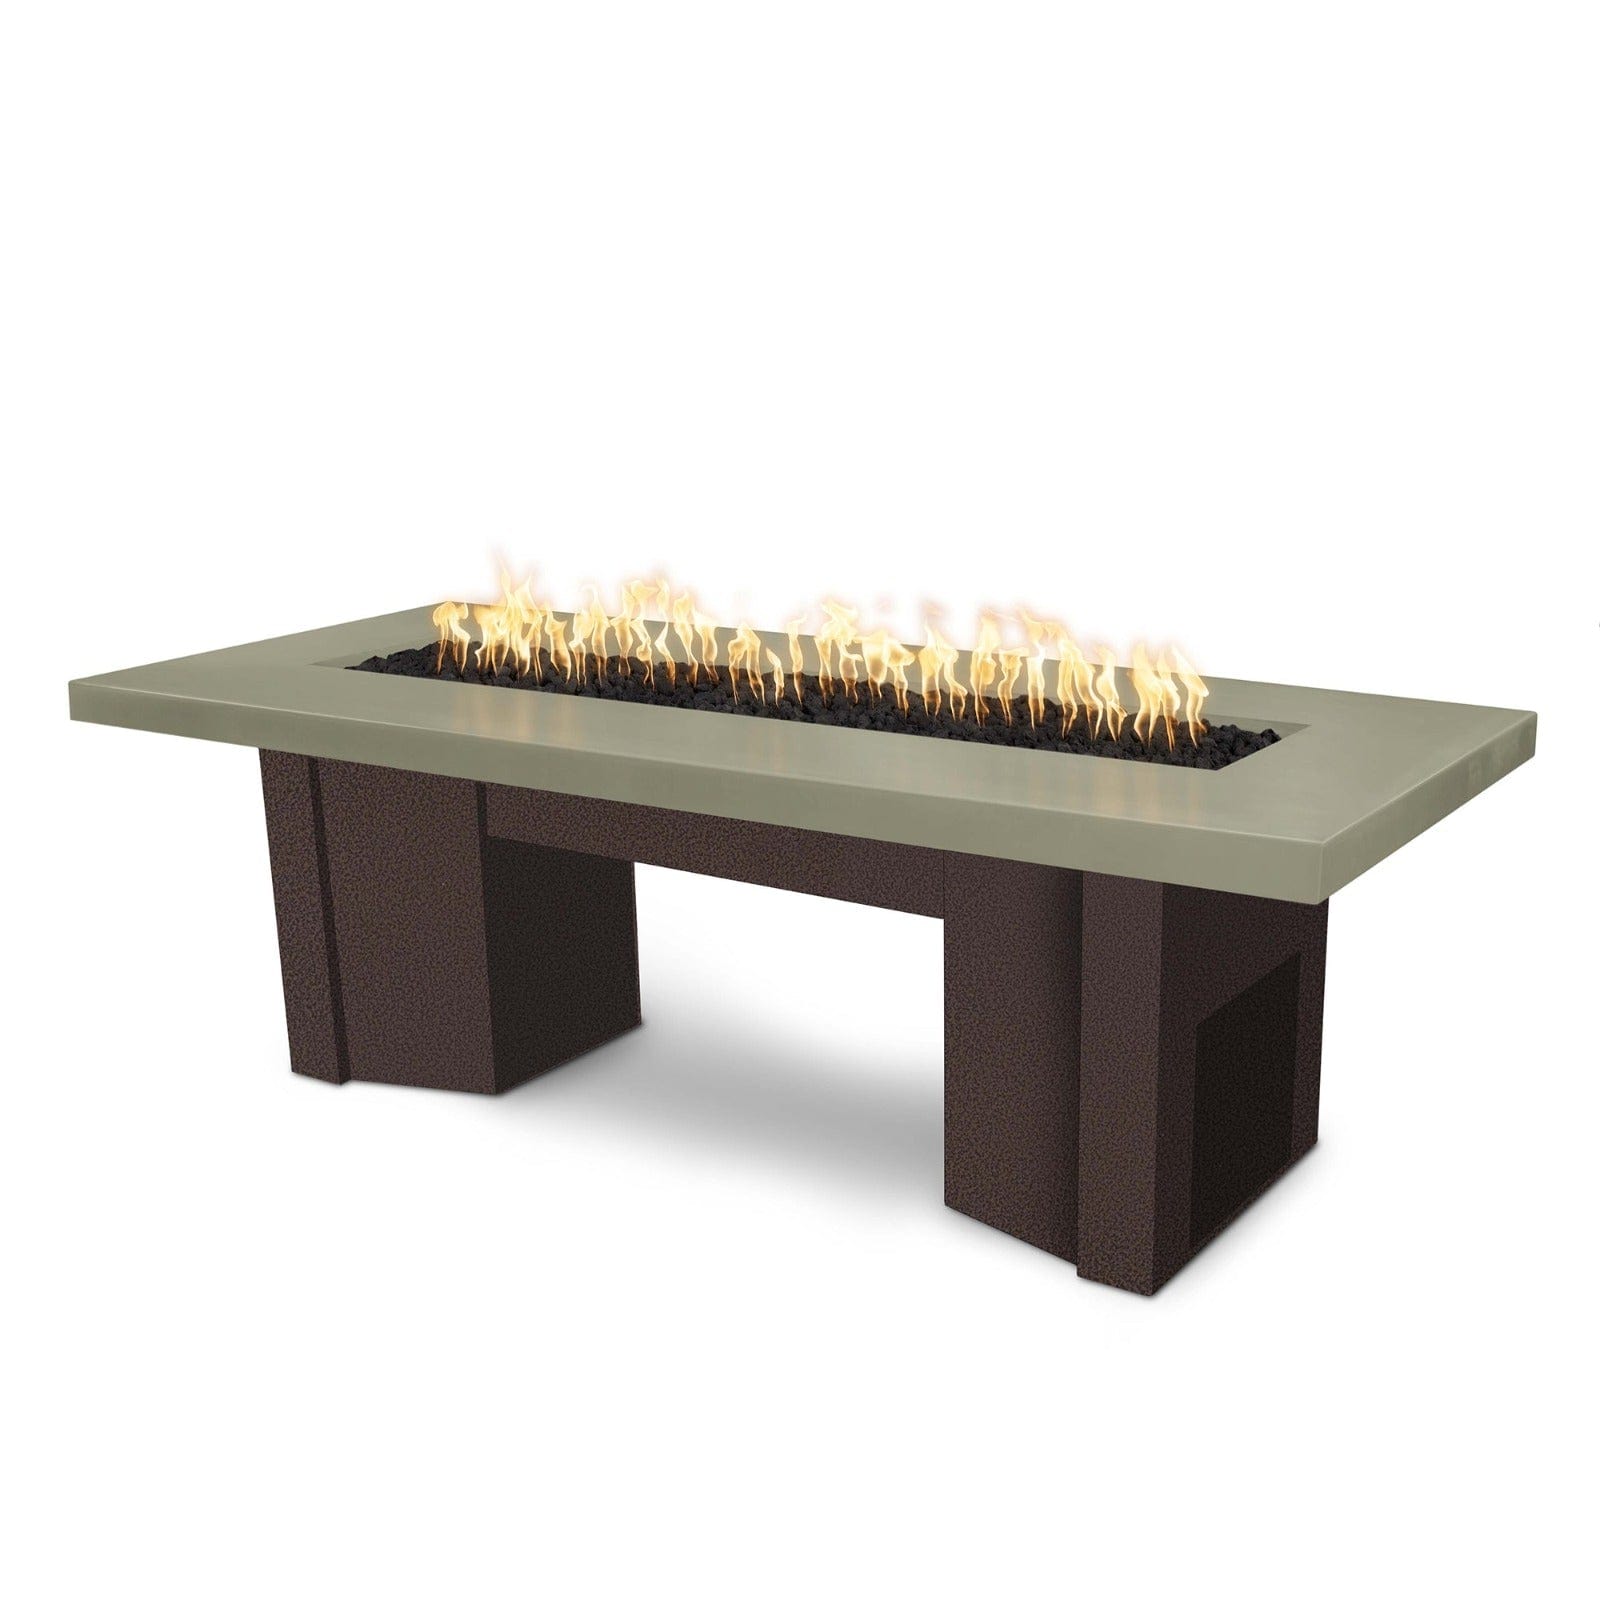 The Outdoor Plus Fire Features Ash (-ASH) / Copper Vein Powder Coated Steel (-CPV) The Outdoor Plus 60" Alameda Fire Table Smooth Concrete in Natural Gas - 110V Plug & Play Electronic Ignition / OPT-ALMGFRC60EKIT-NG